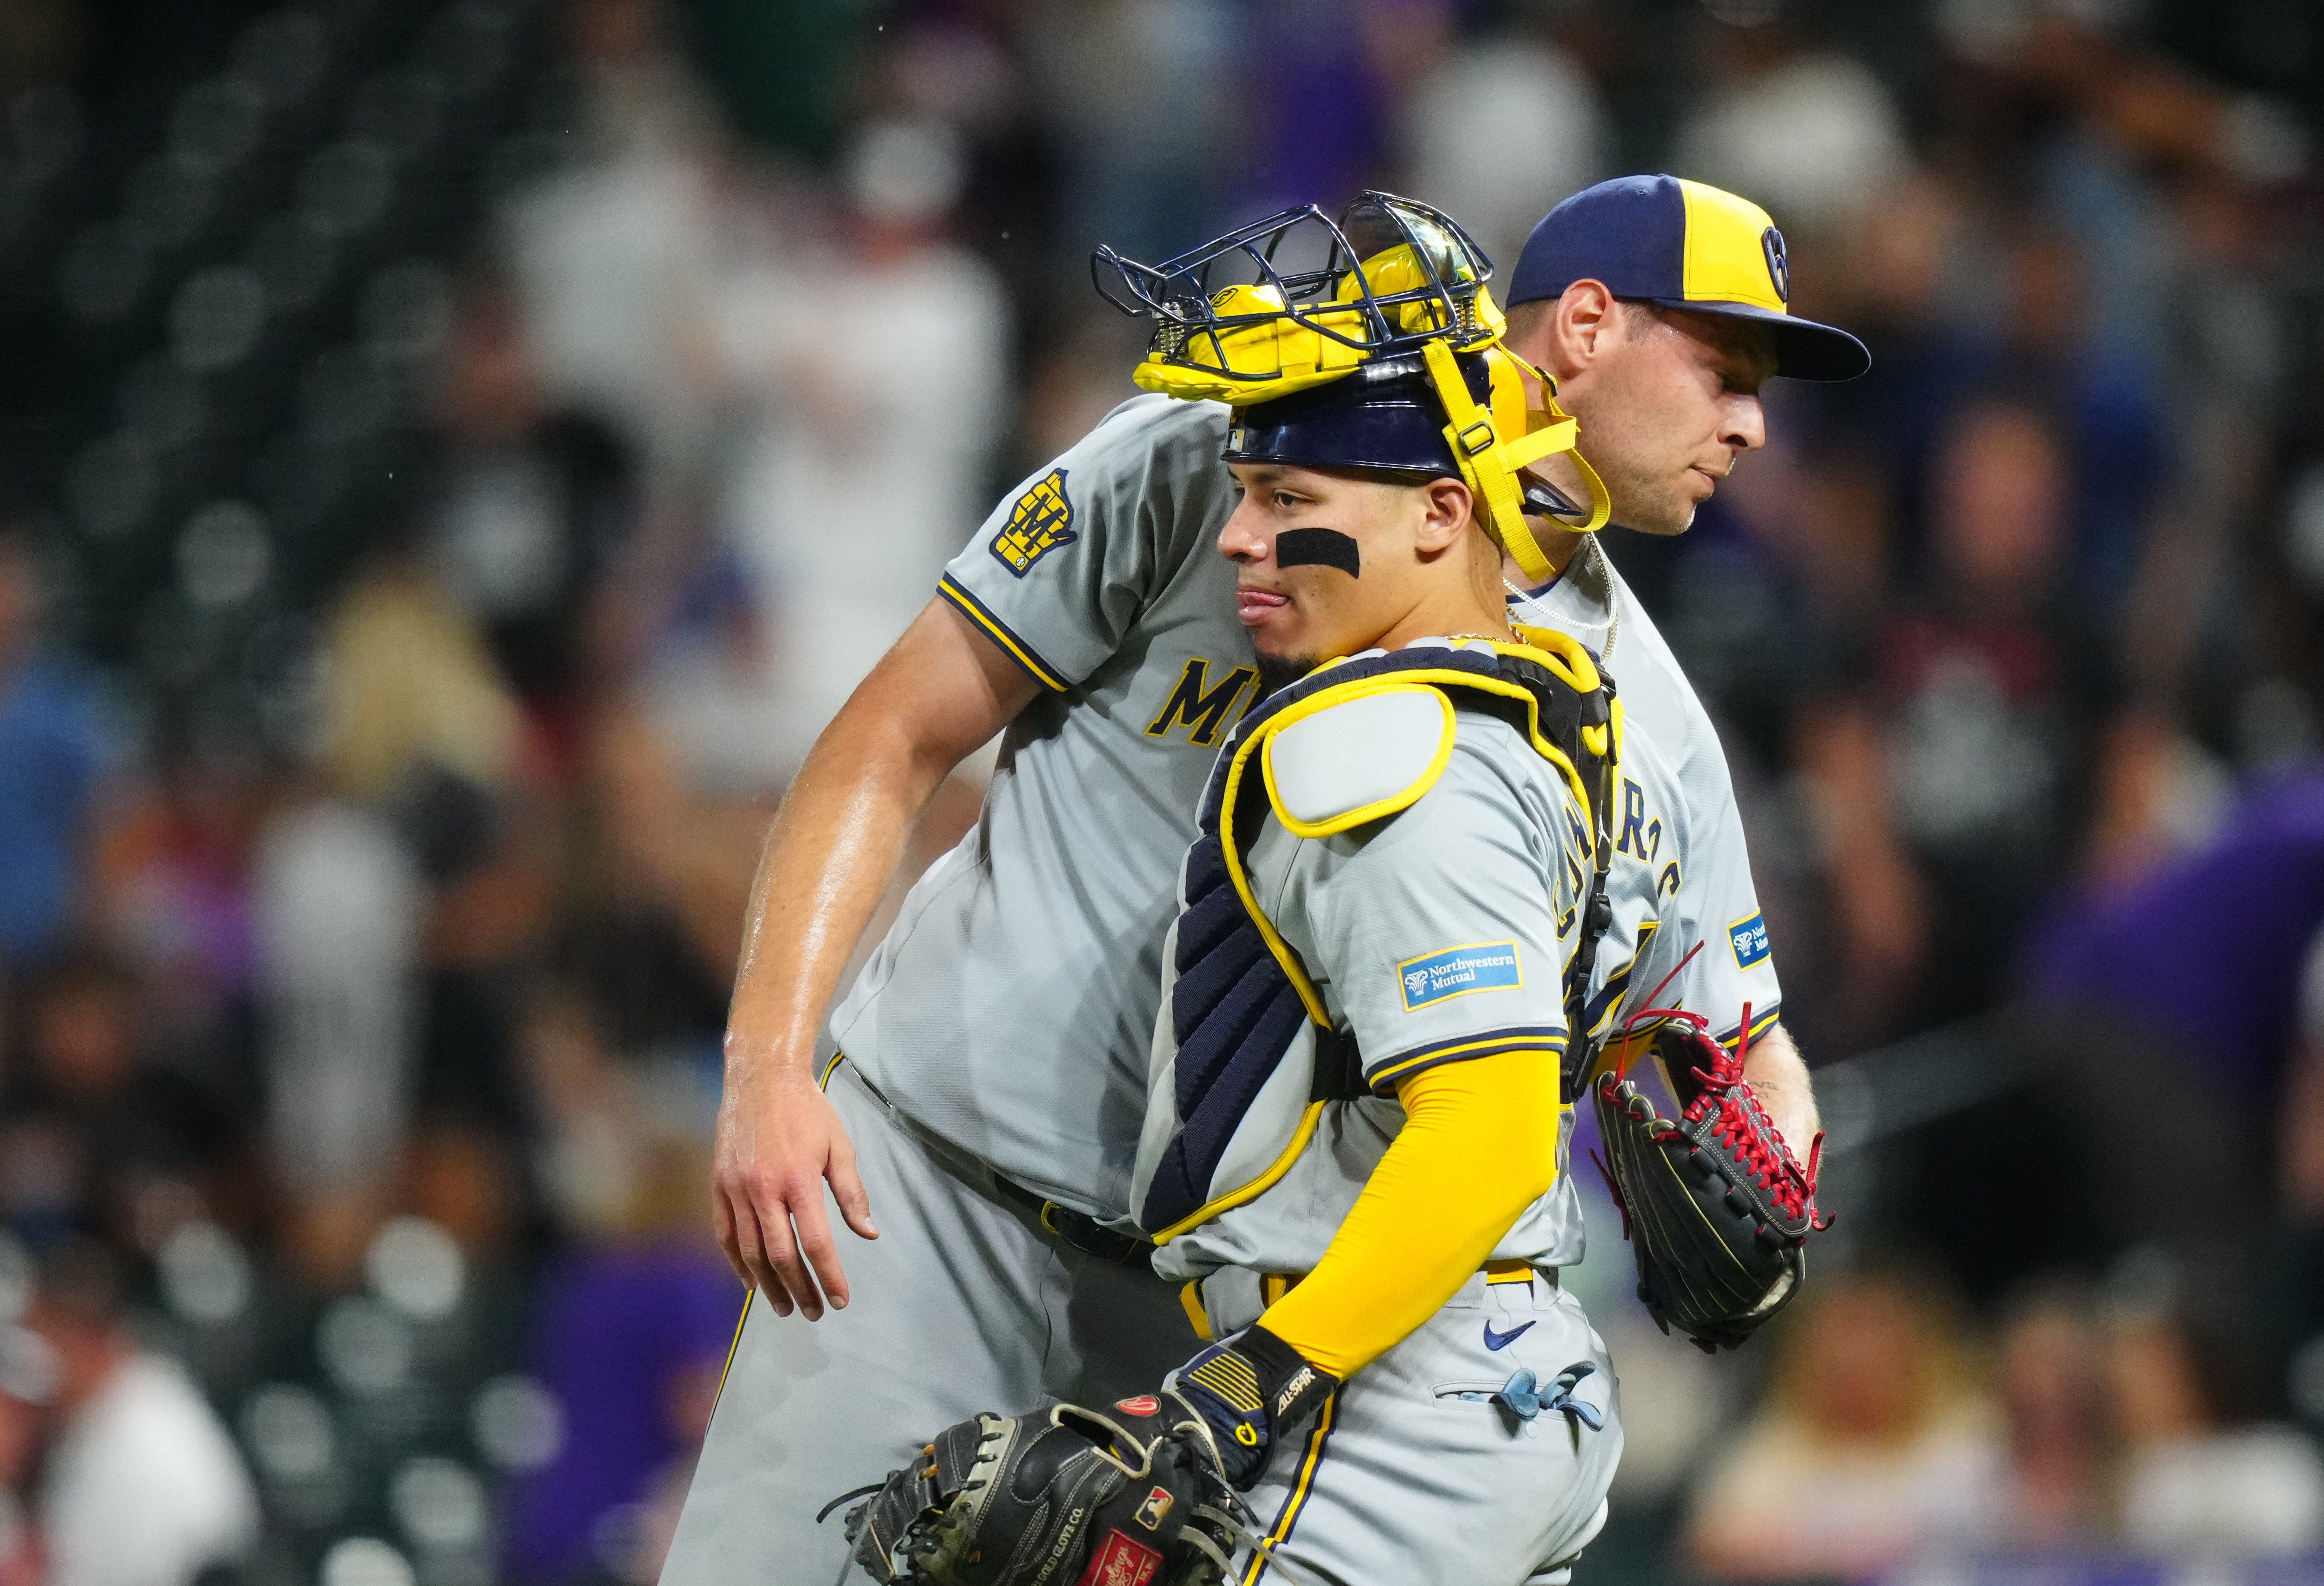 Brewers 4, Rockies 3: At long last, Milwaukee wins a close game in its house of horrors